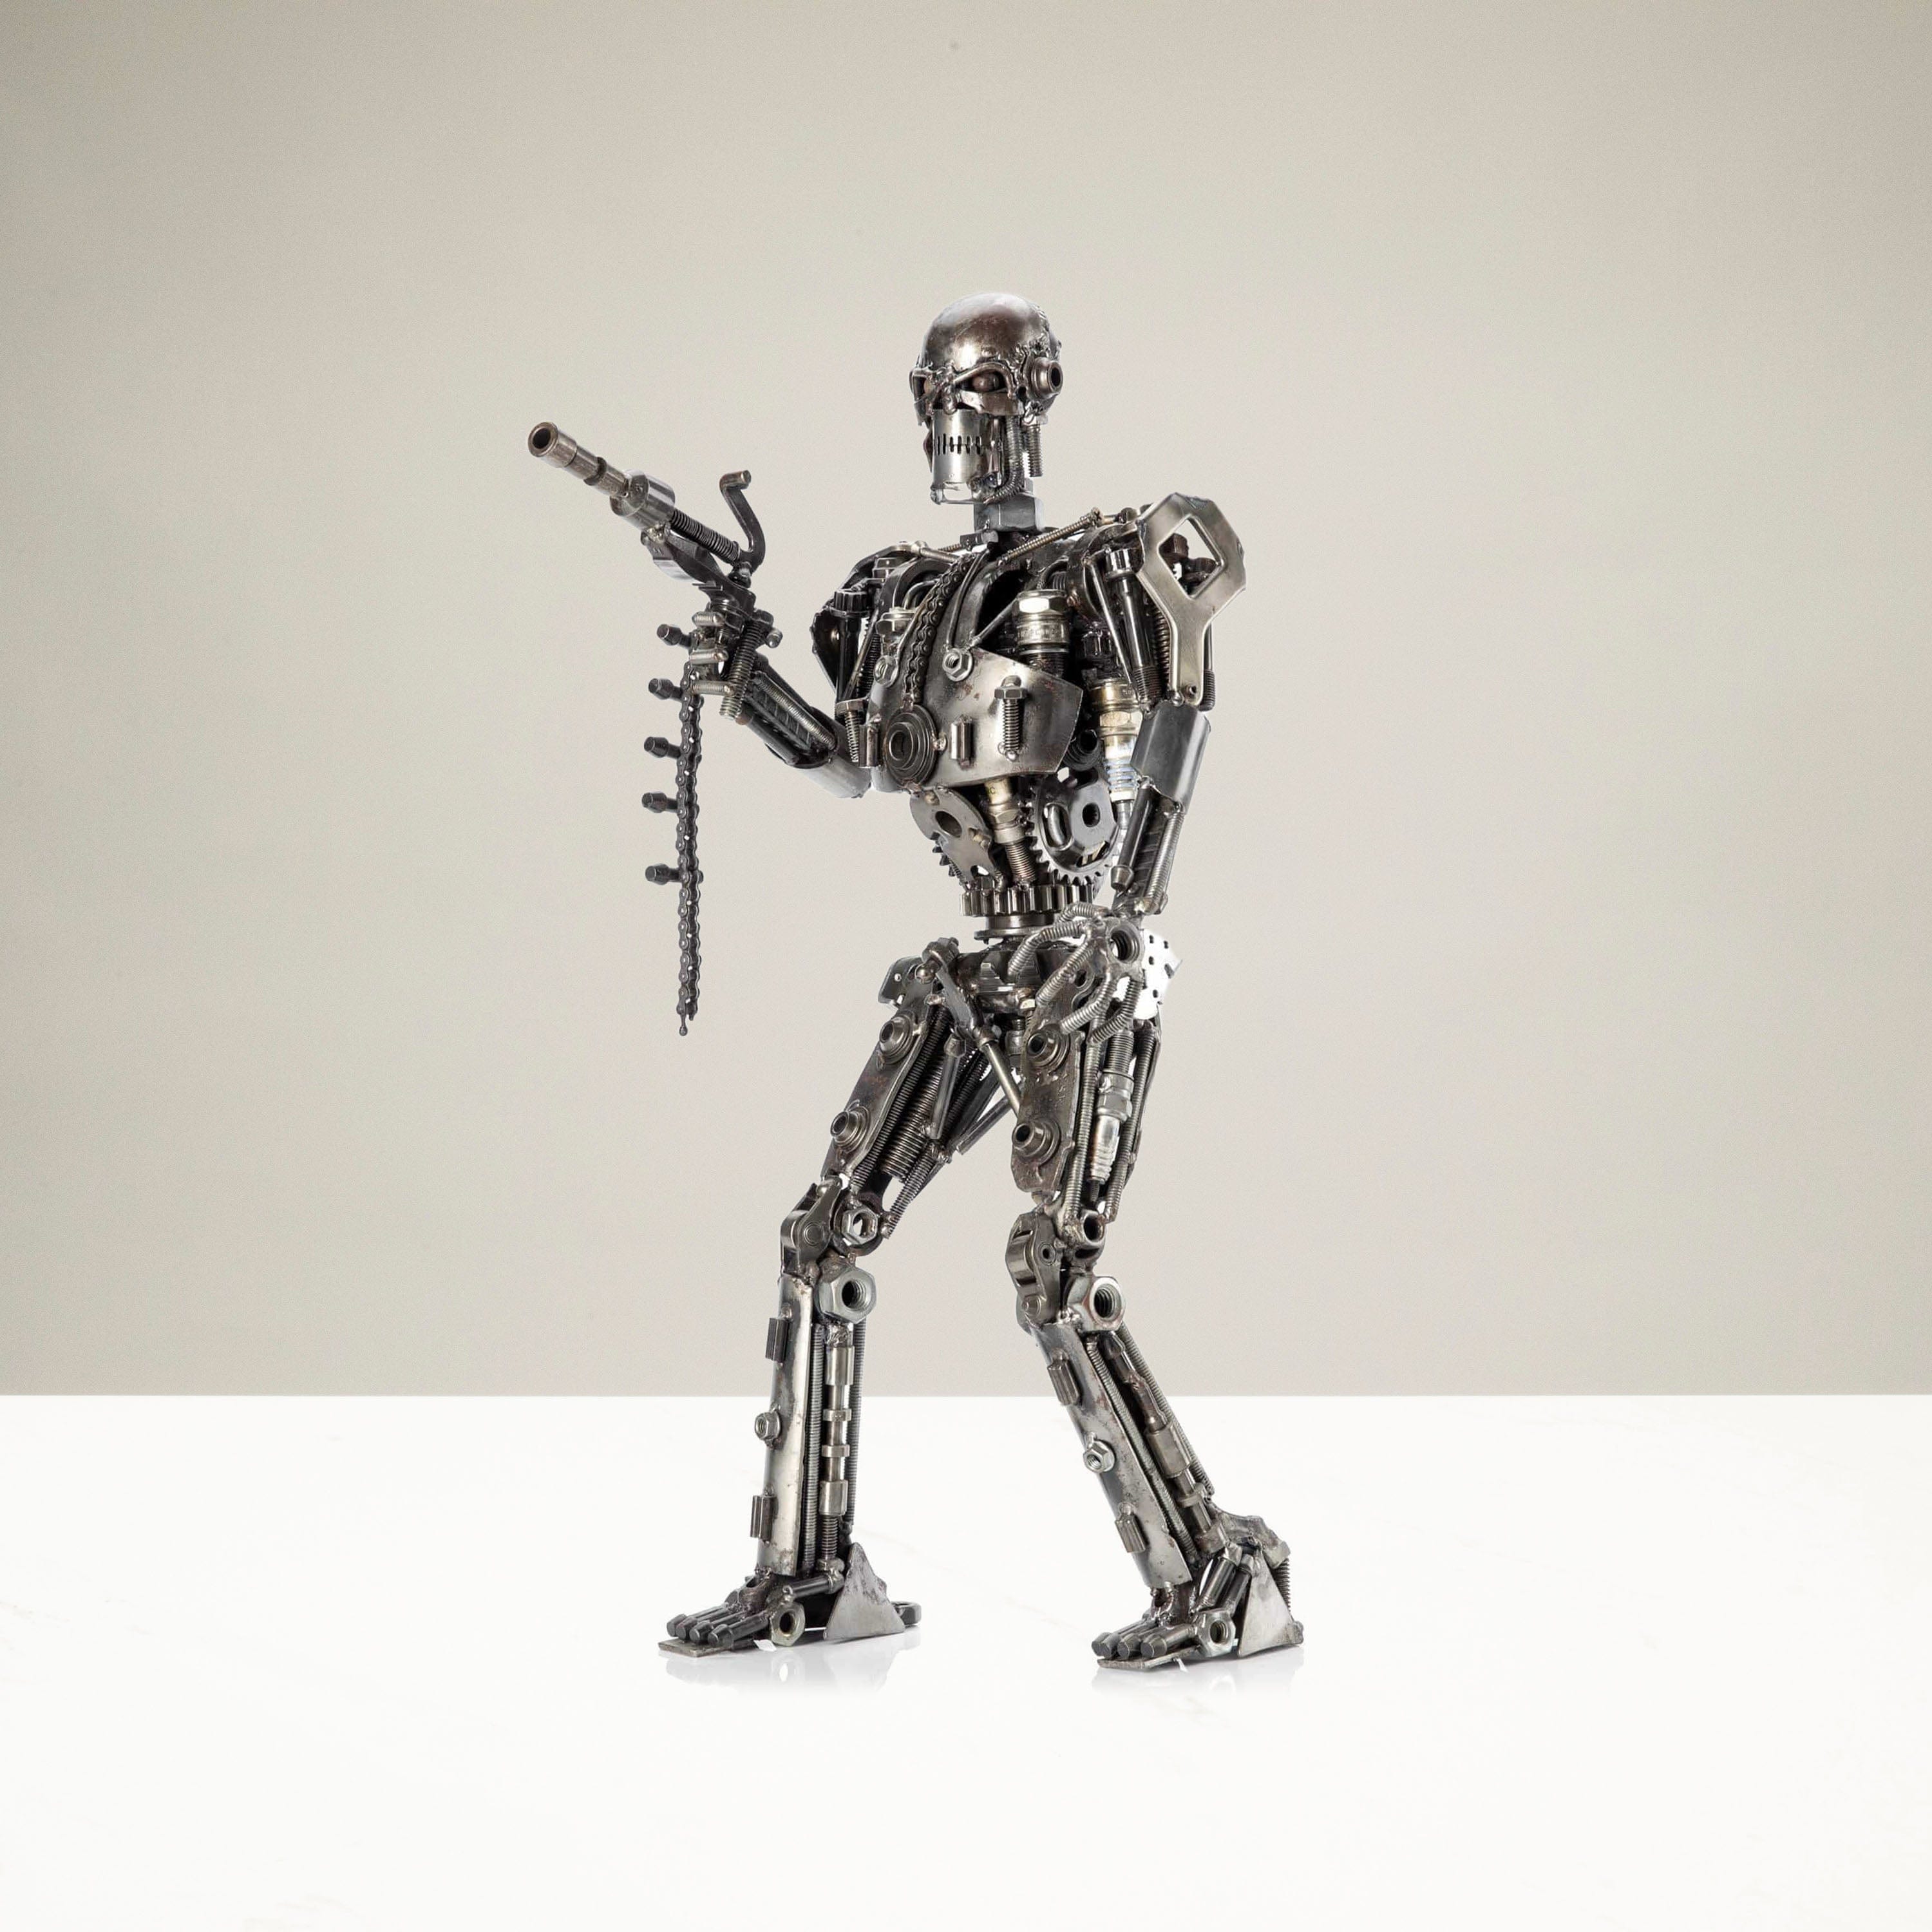 Kalifano Recycled Metal Art 22" Terminator Inspired Recycled Metal Sculpture RMS-T52x30-S